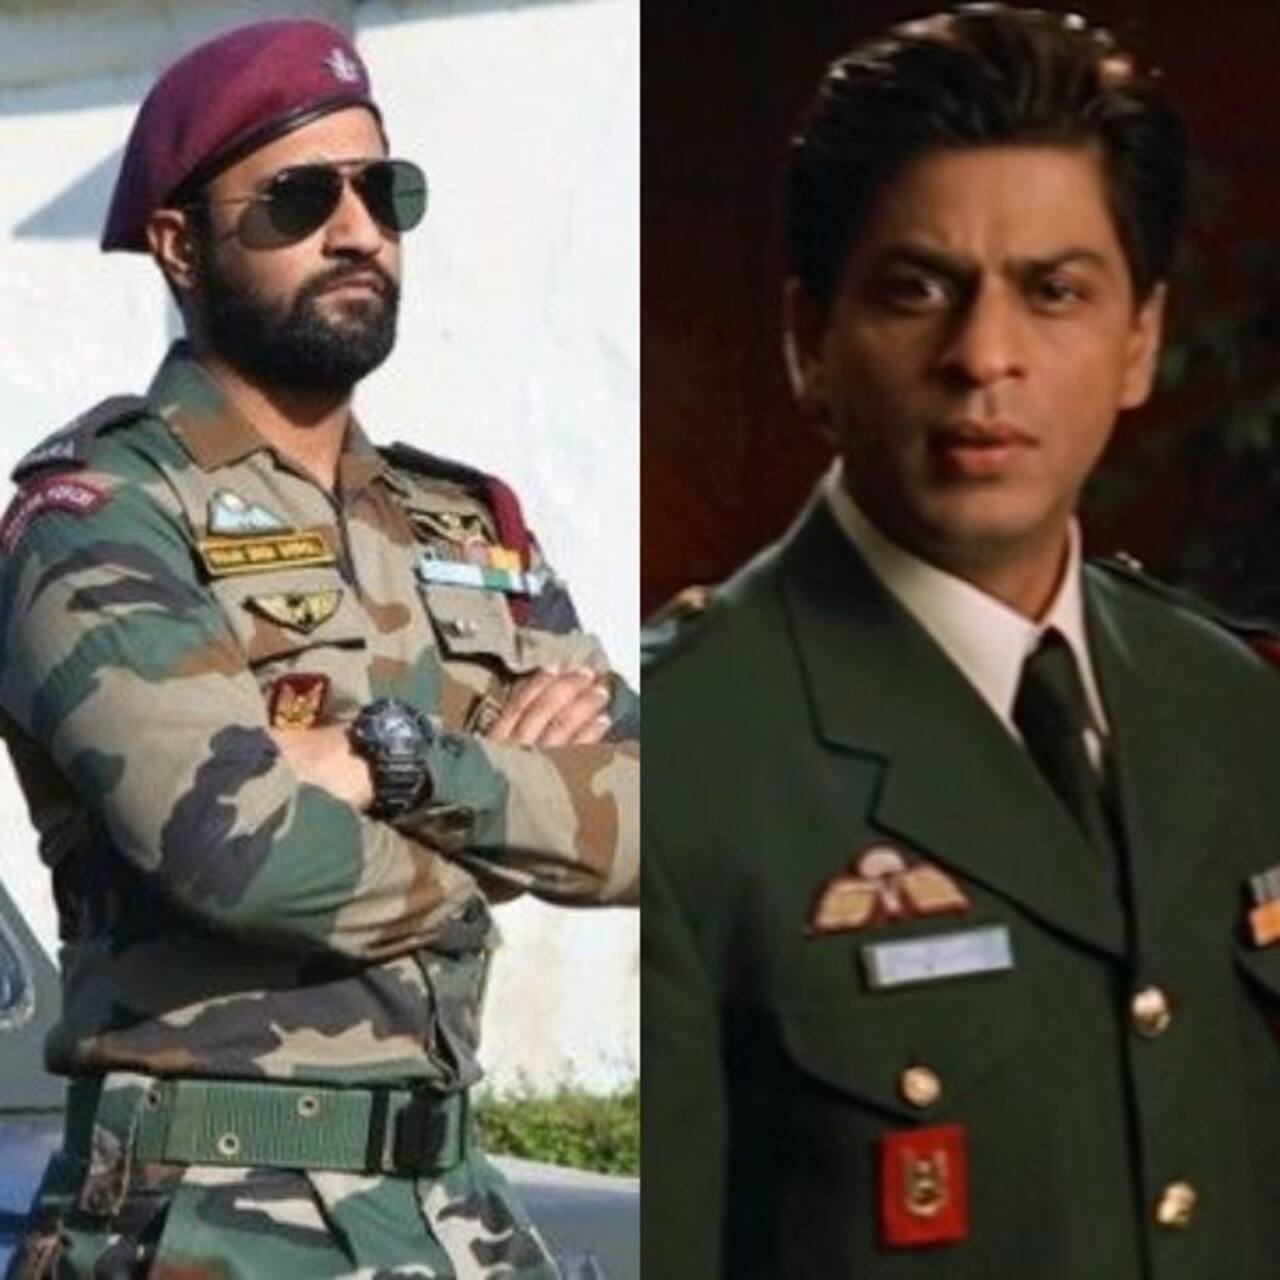 Independence Day 2021: From Shah Rukh Khan to Vicky Kaushal, which Bollywood actor nailed the army officer role? Vote now